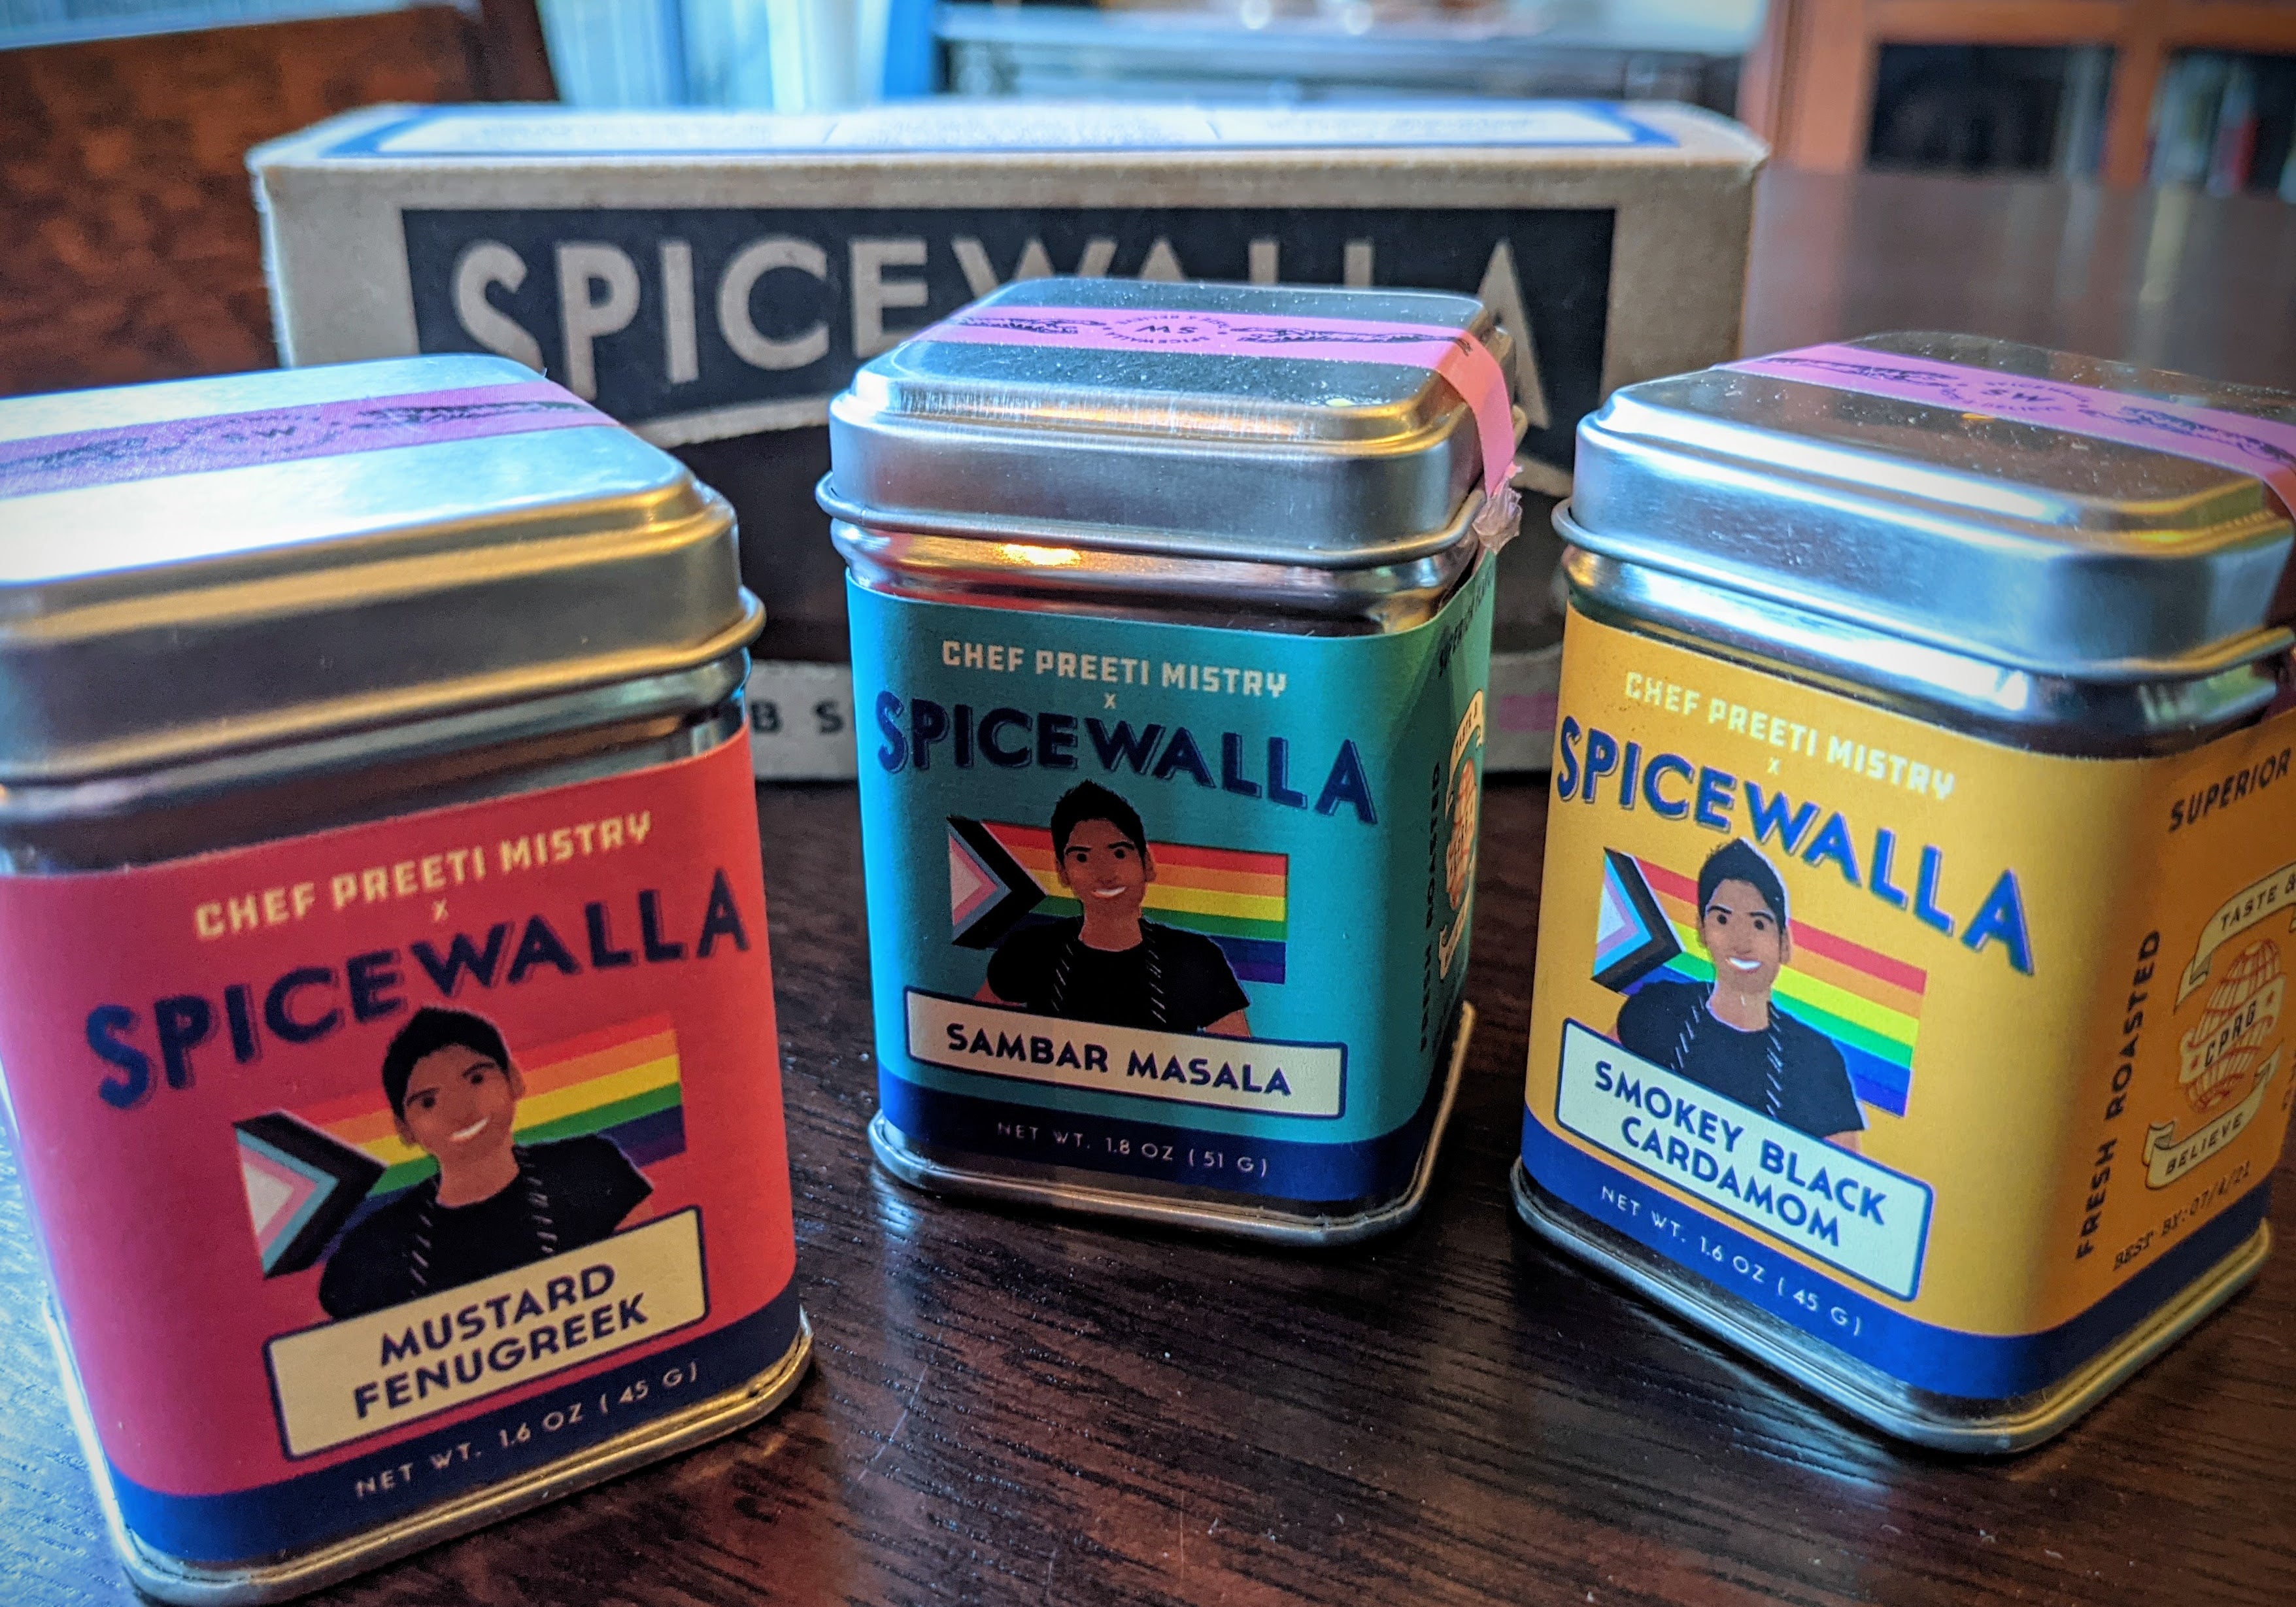 3 spice tins with labels 